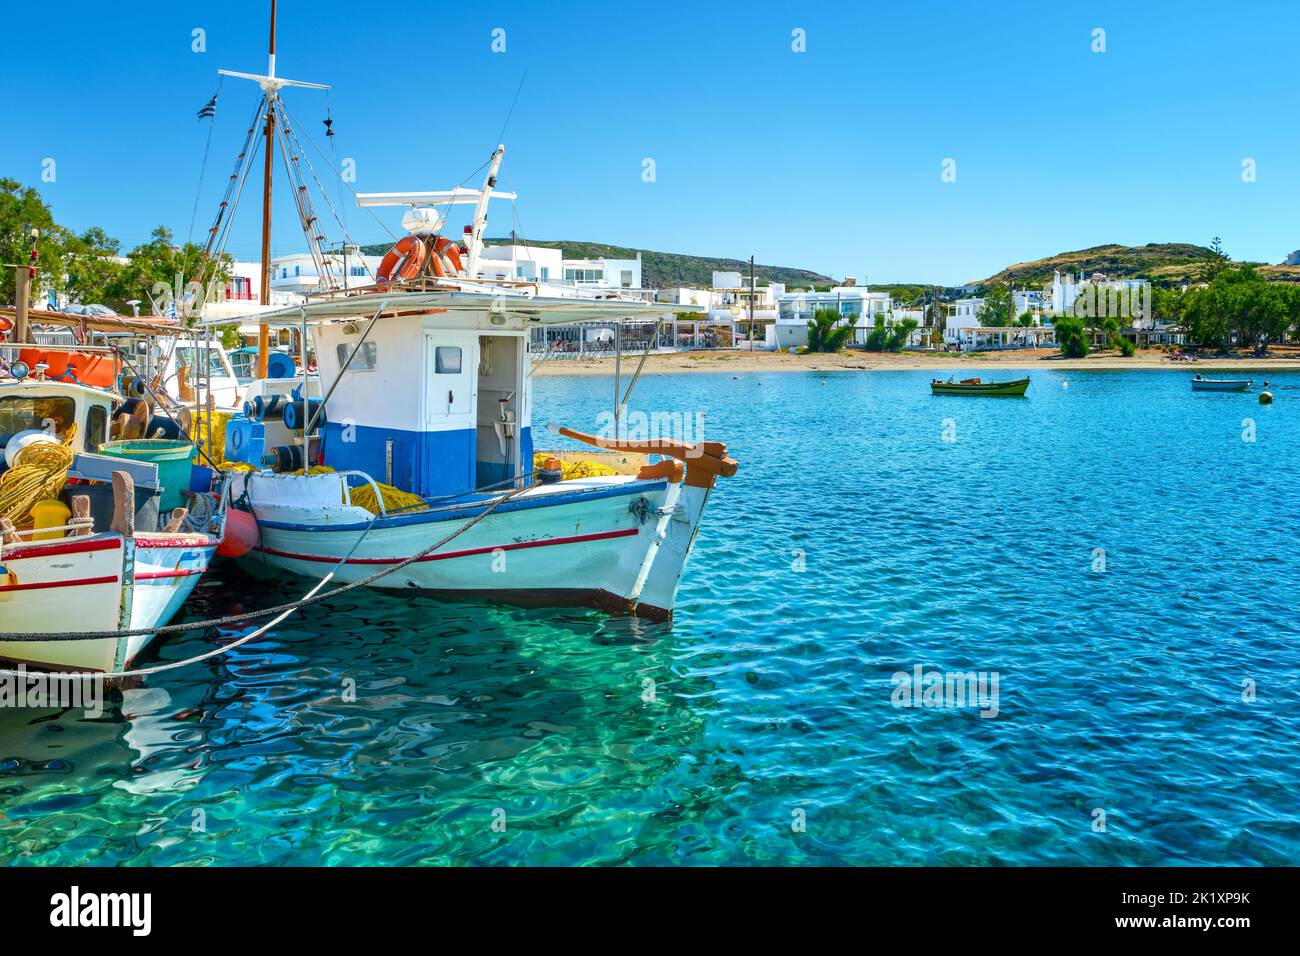 Beautiful view of Greek fishing boats anchored in a small village. Whitewashed houses, fishing boat, clear blue sky, bay, sea, hills. Milos, Greece Stock Photo